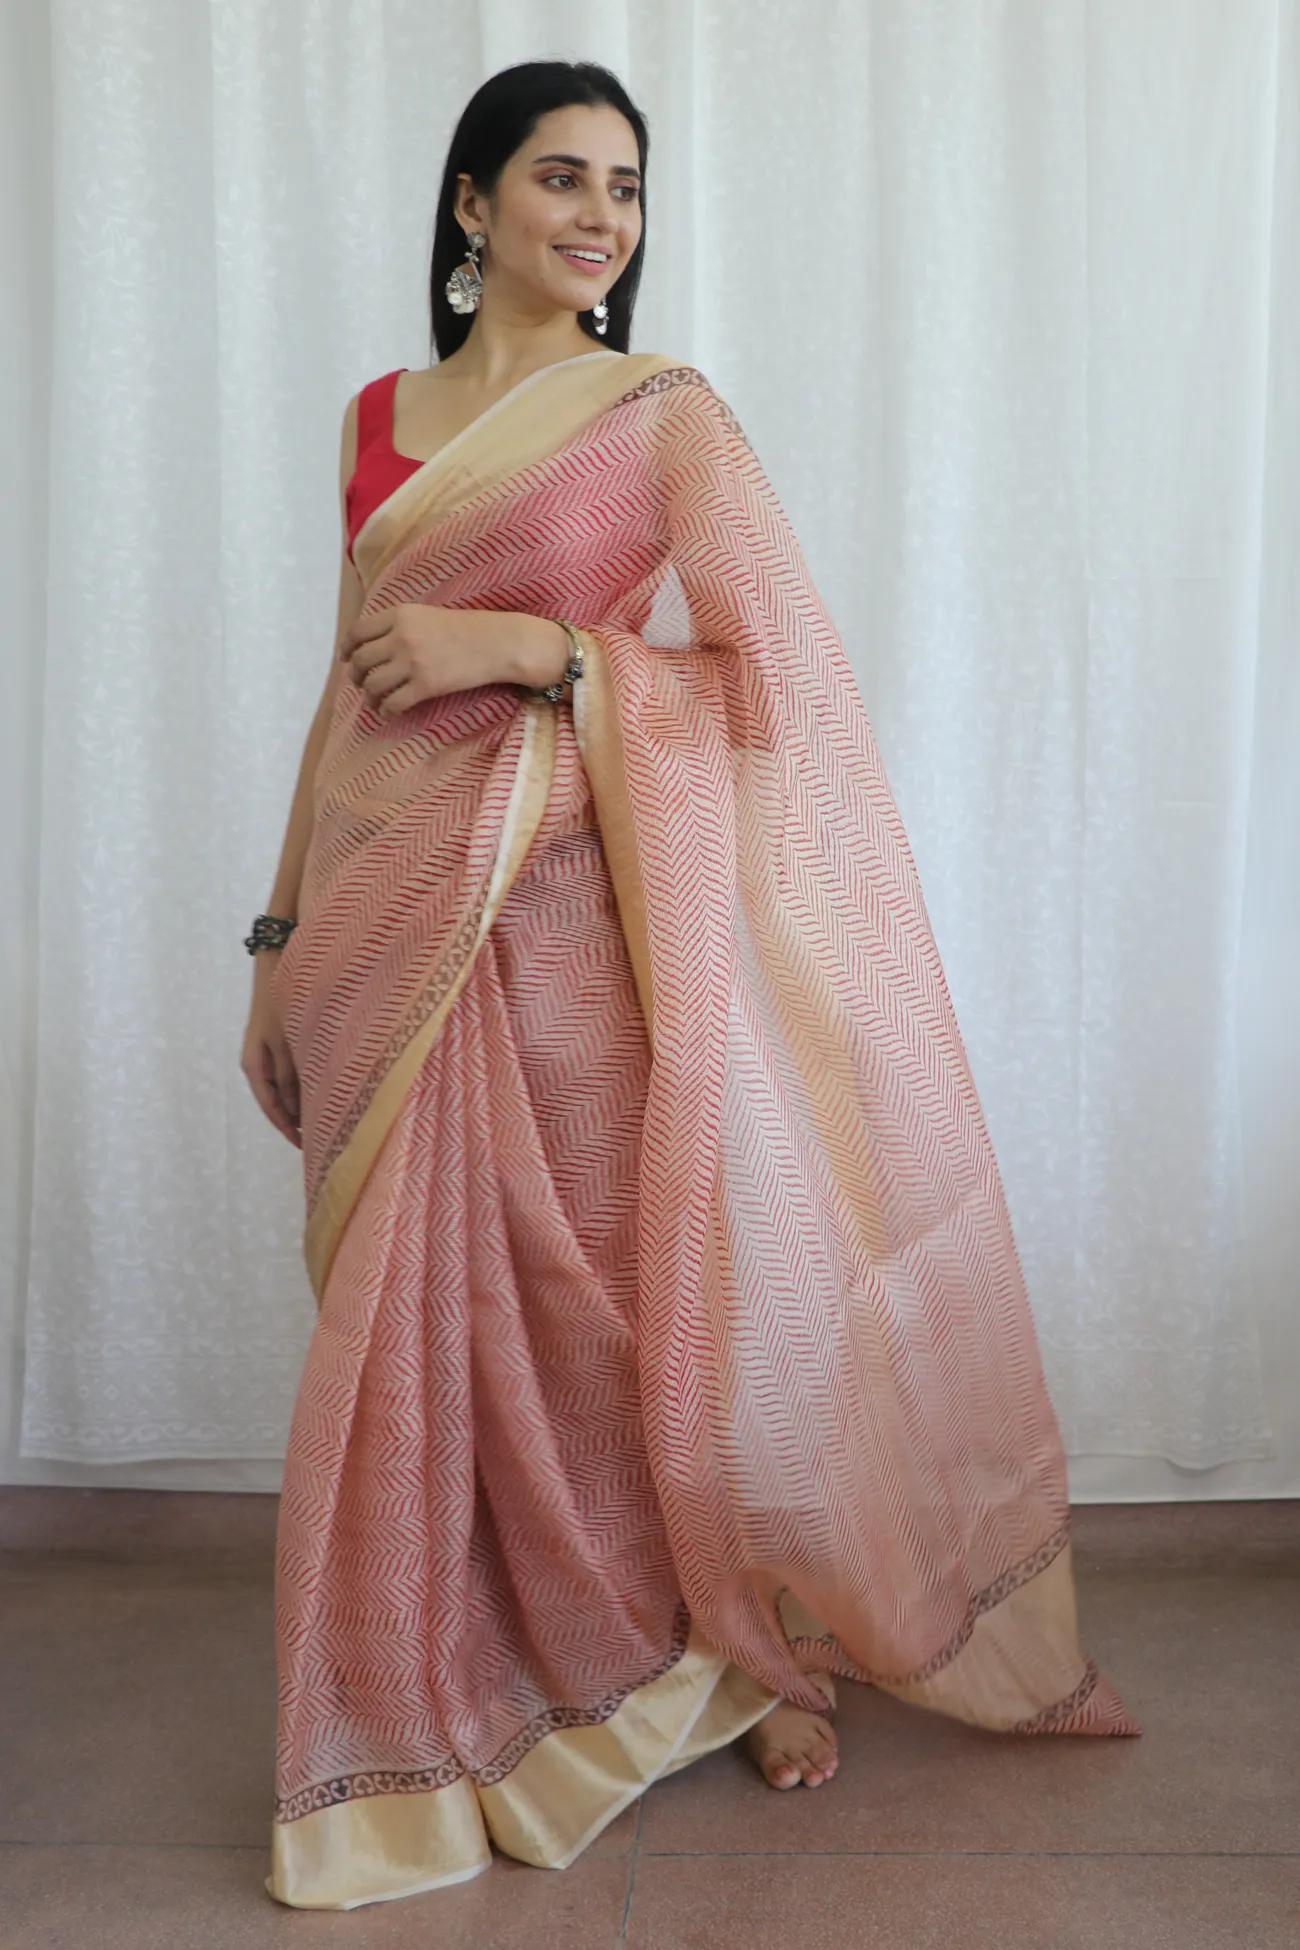 Shop Online For The Latest Saree At Affordable Prices